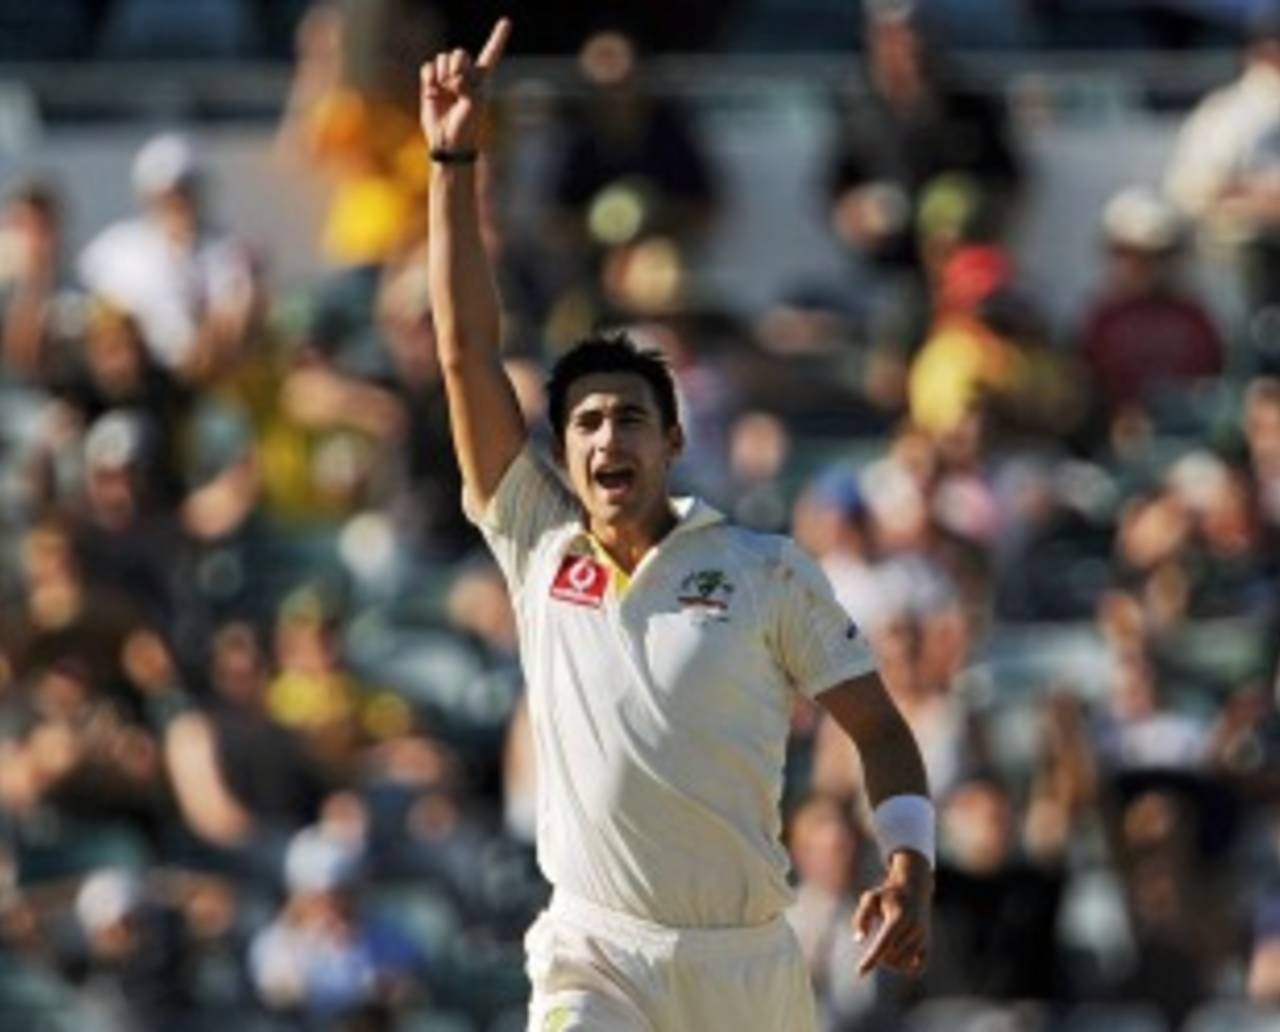 Mitchell Starc finished South Africa's innings with six wickets, Australia v South Africa, 3rd Test, Perth, 3rd day, December 2, 2012